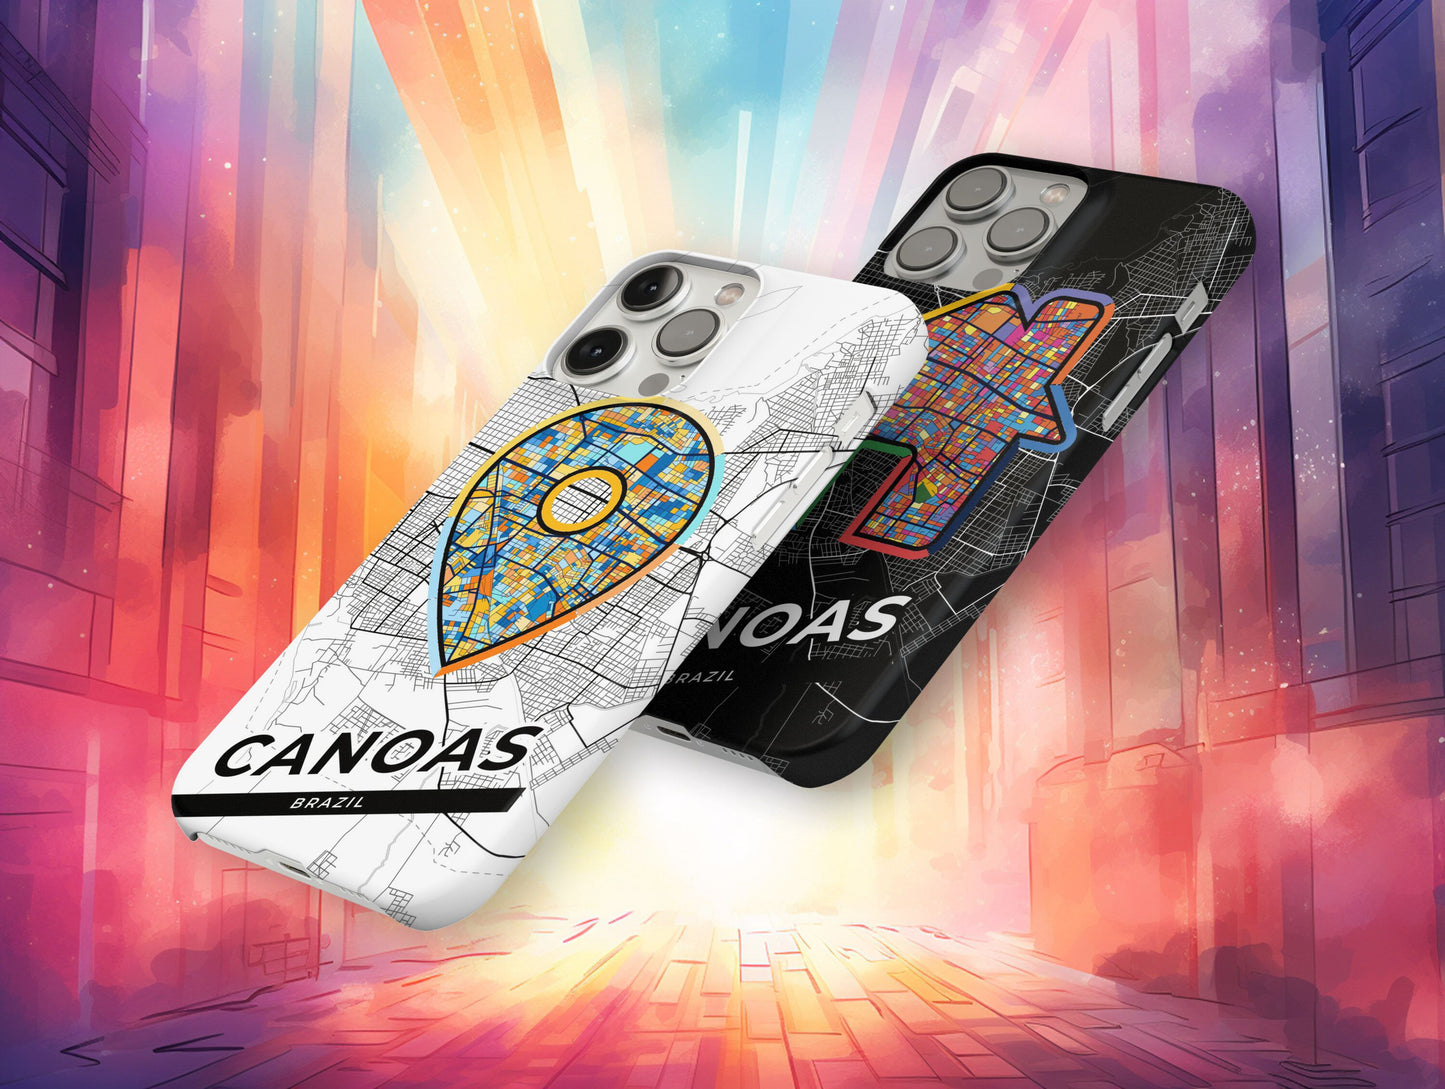 Canoas Brazil slim phone case with colorful icon. Birthday, wedding or housewarming gift. Couple match cases.